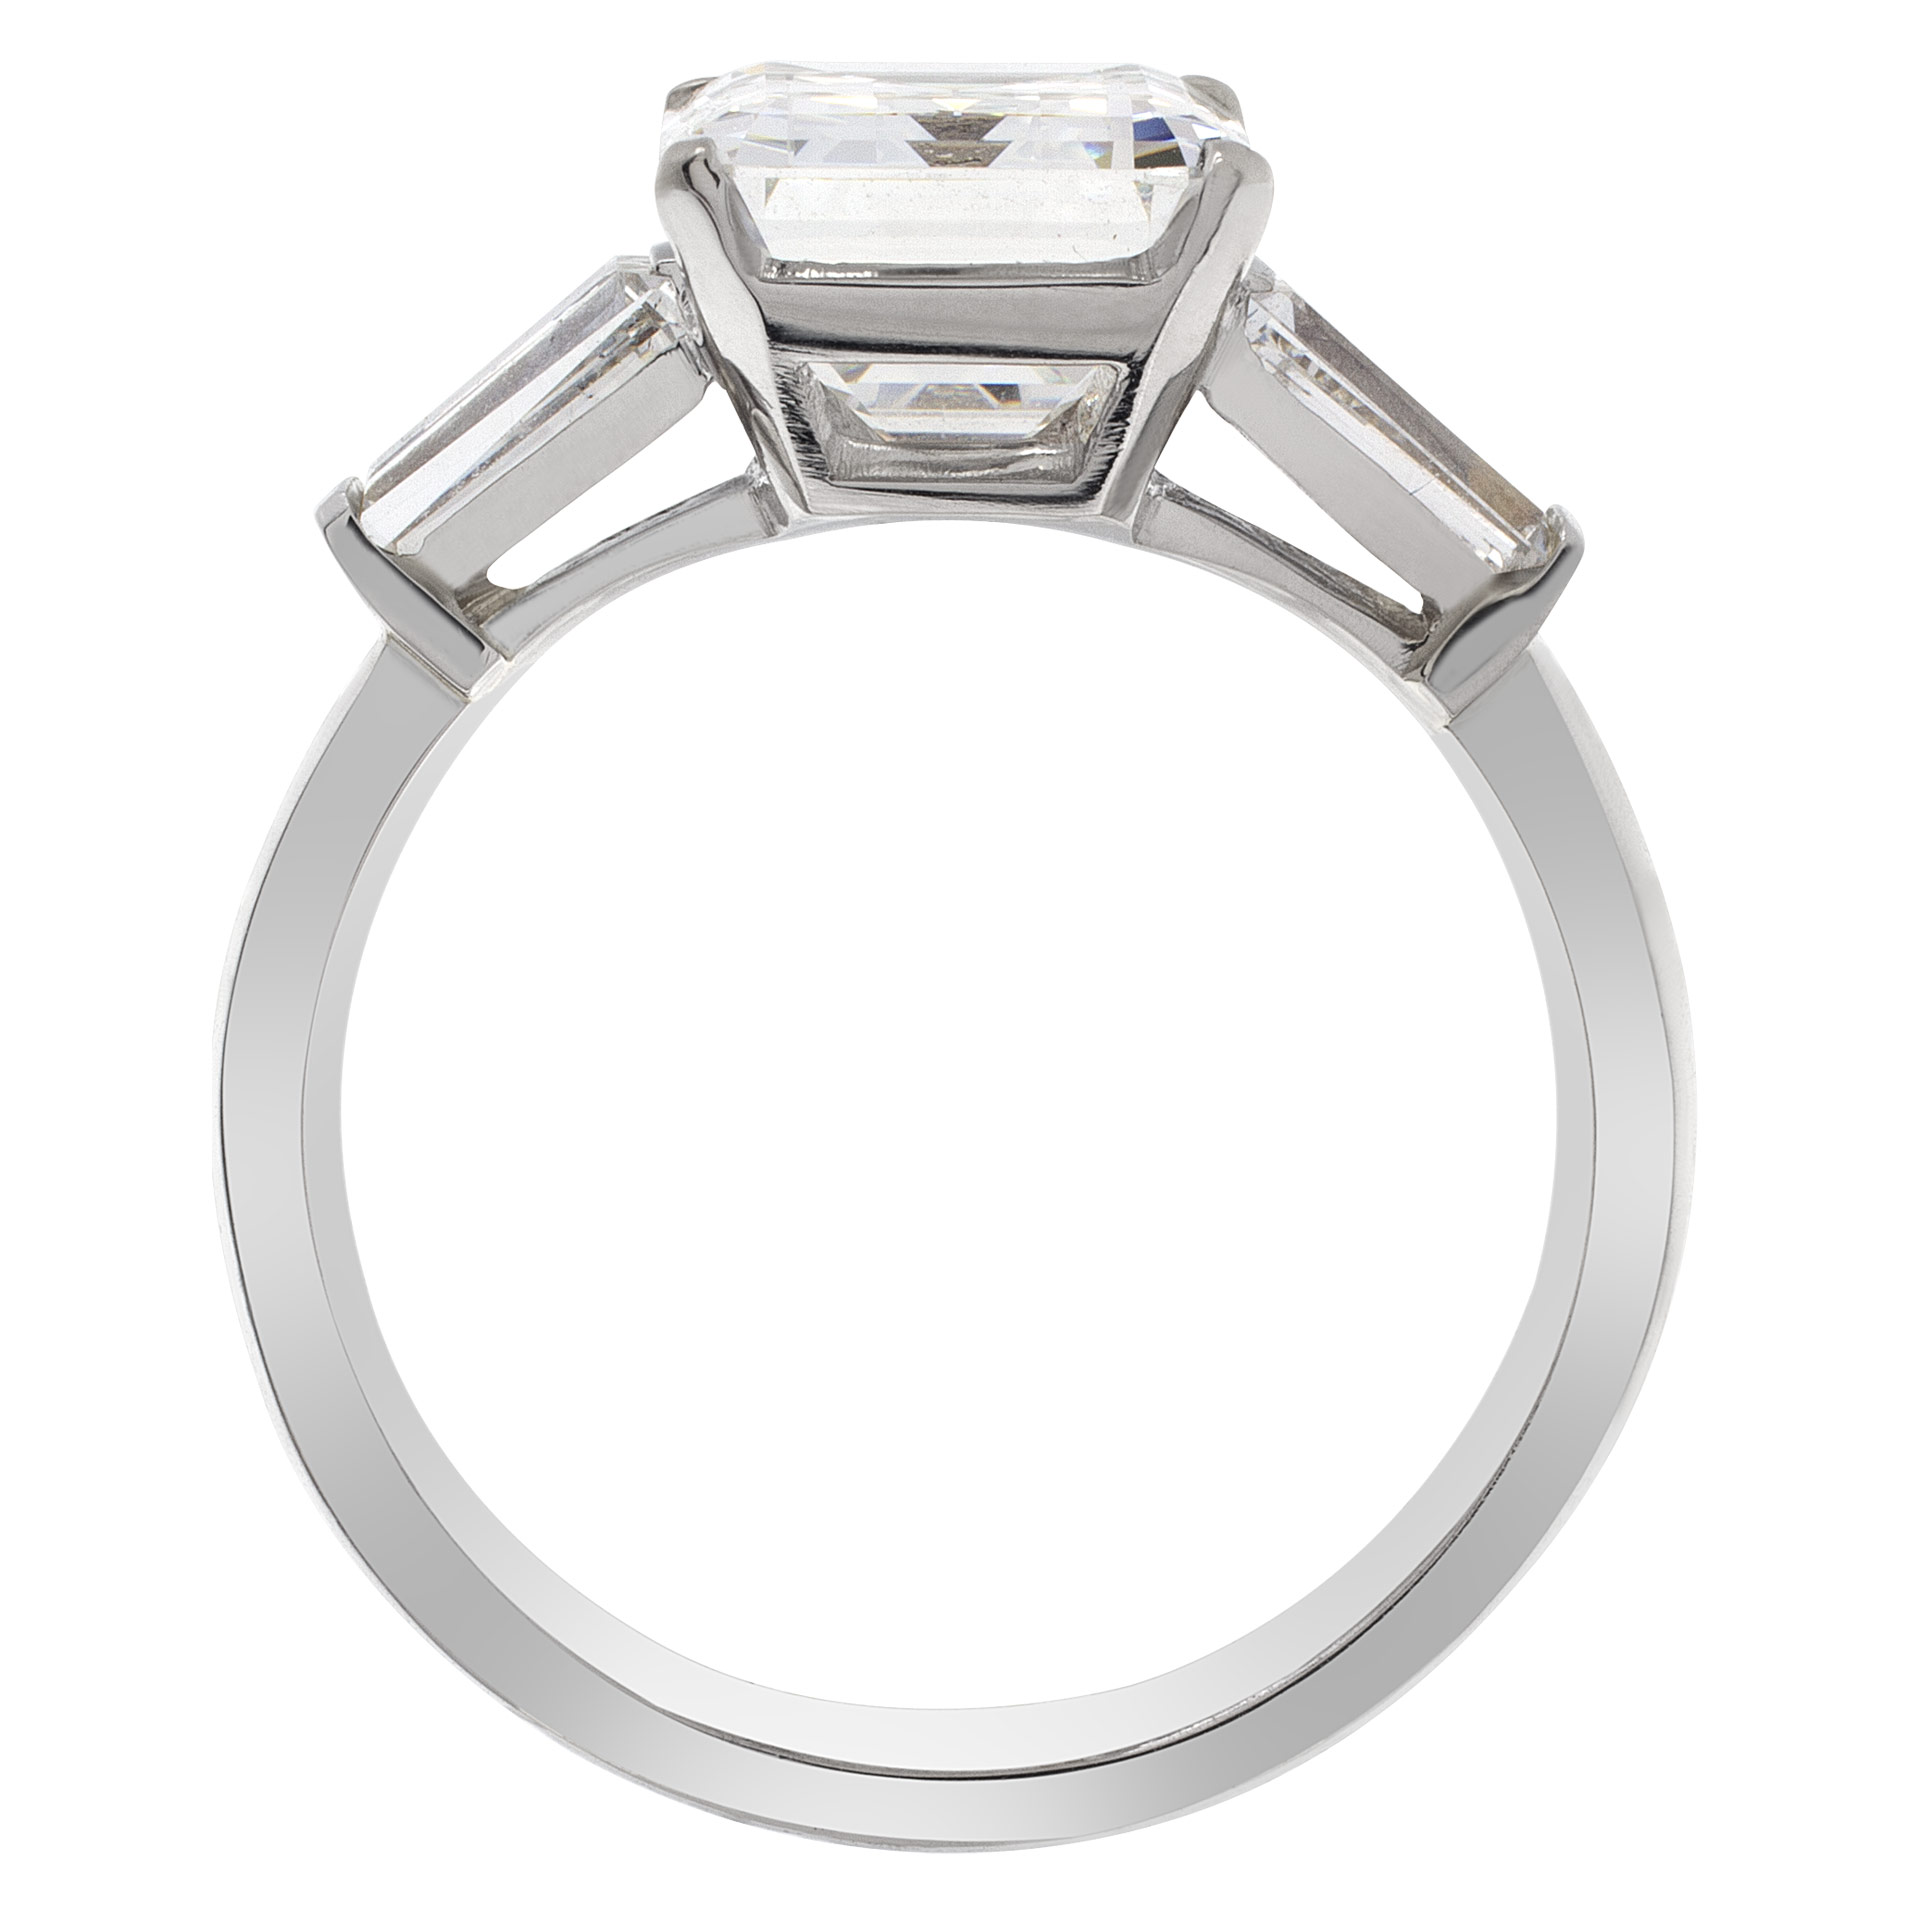 GIA certified emerald cut 3.95 carat (F color, VVS2 clarity) ring set in platinum setting image 4